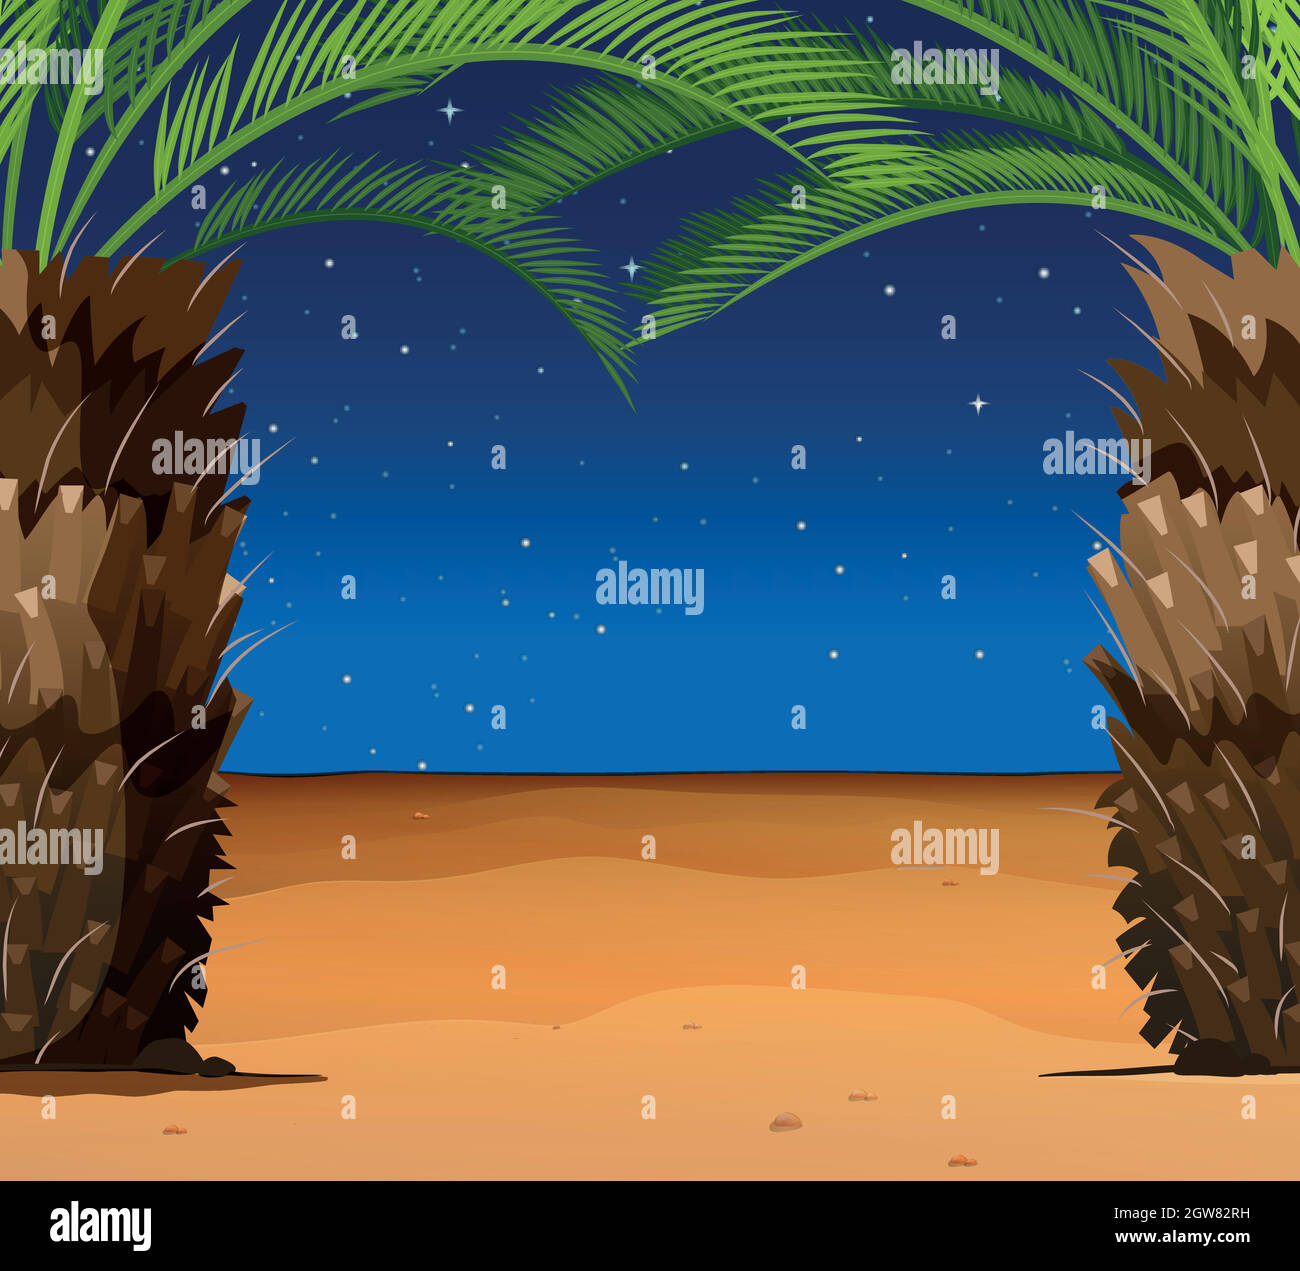 Scene with palm trees on the beach Stock Vector